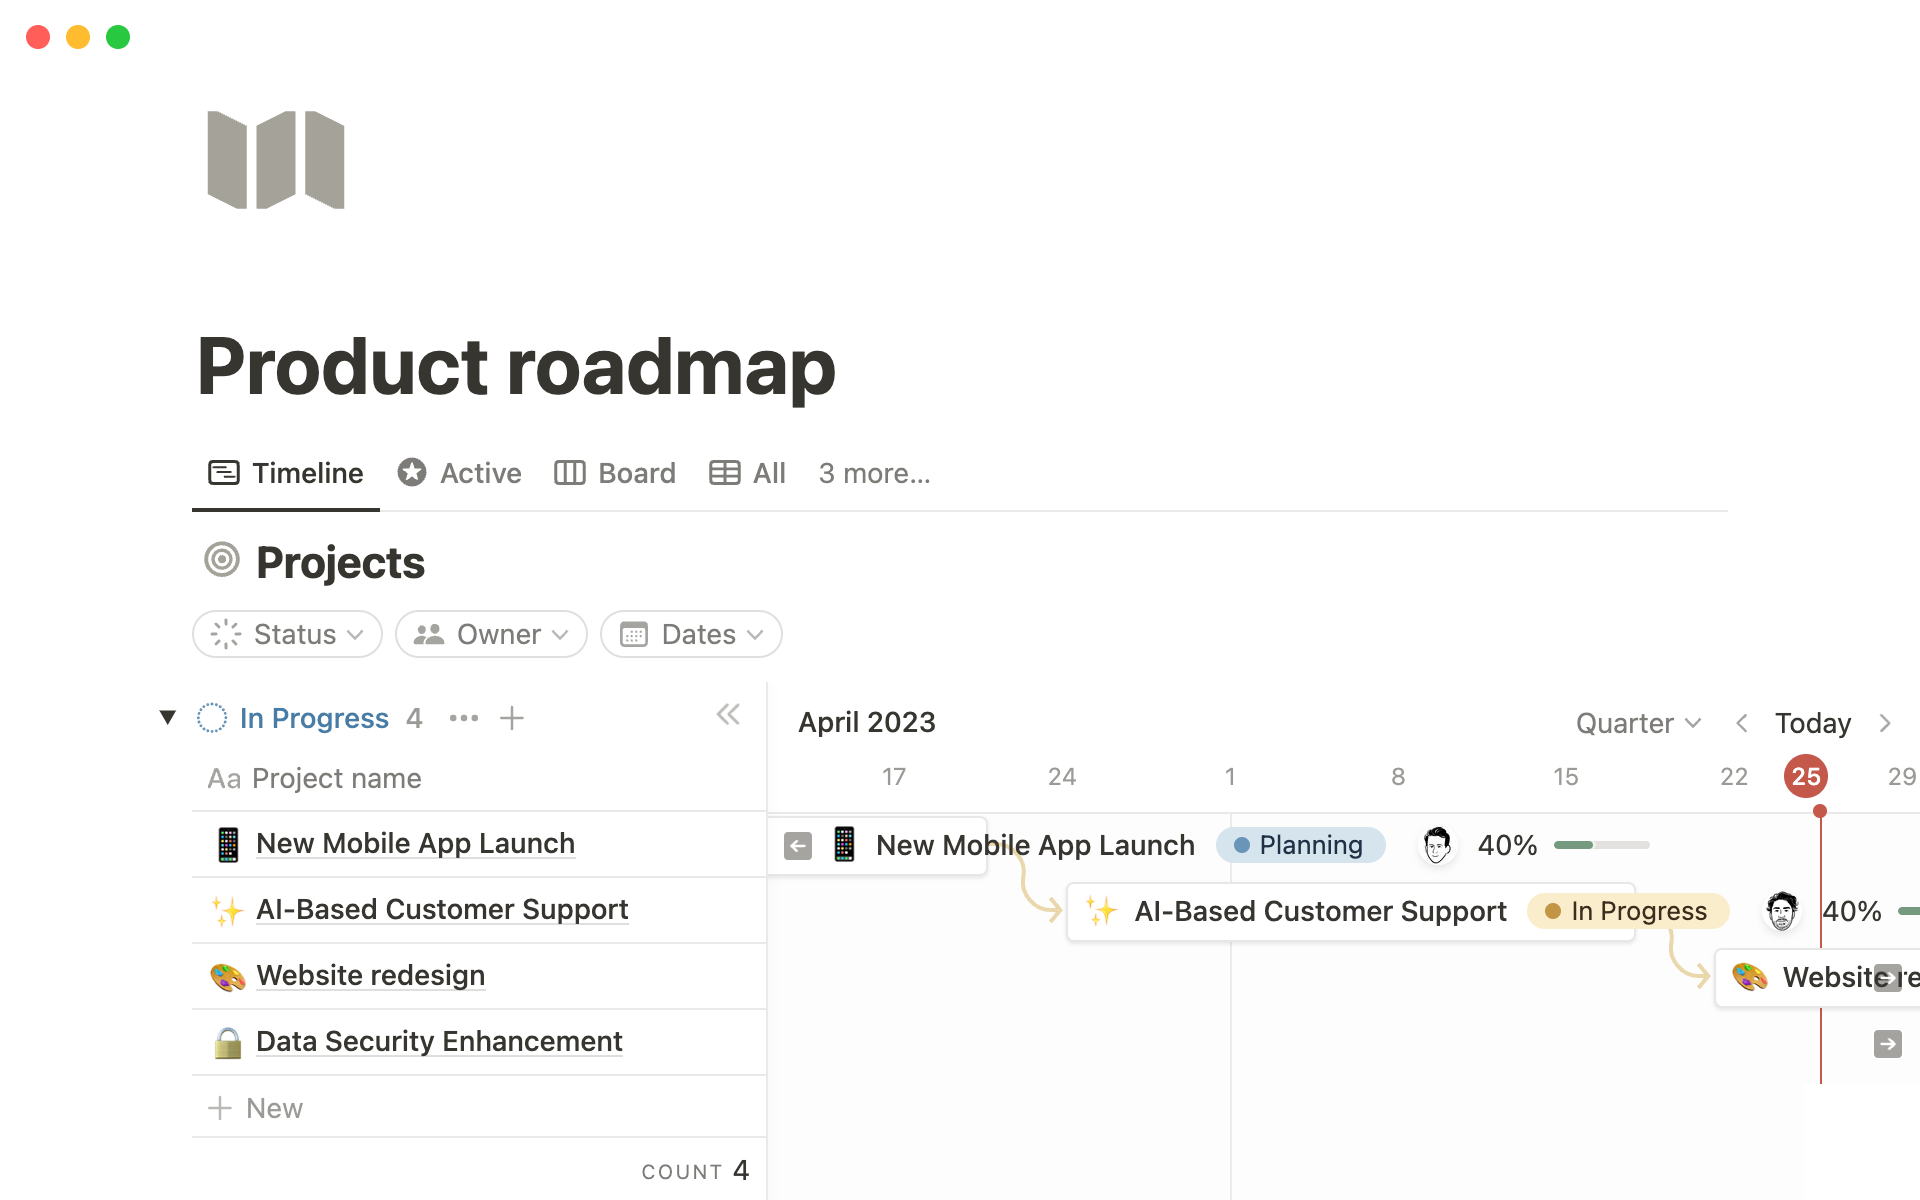 Gantt chart displaying projects dependencies.